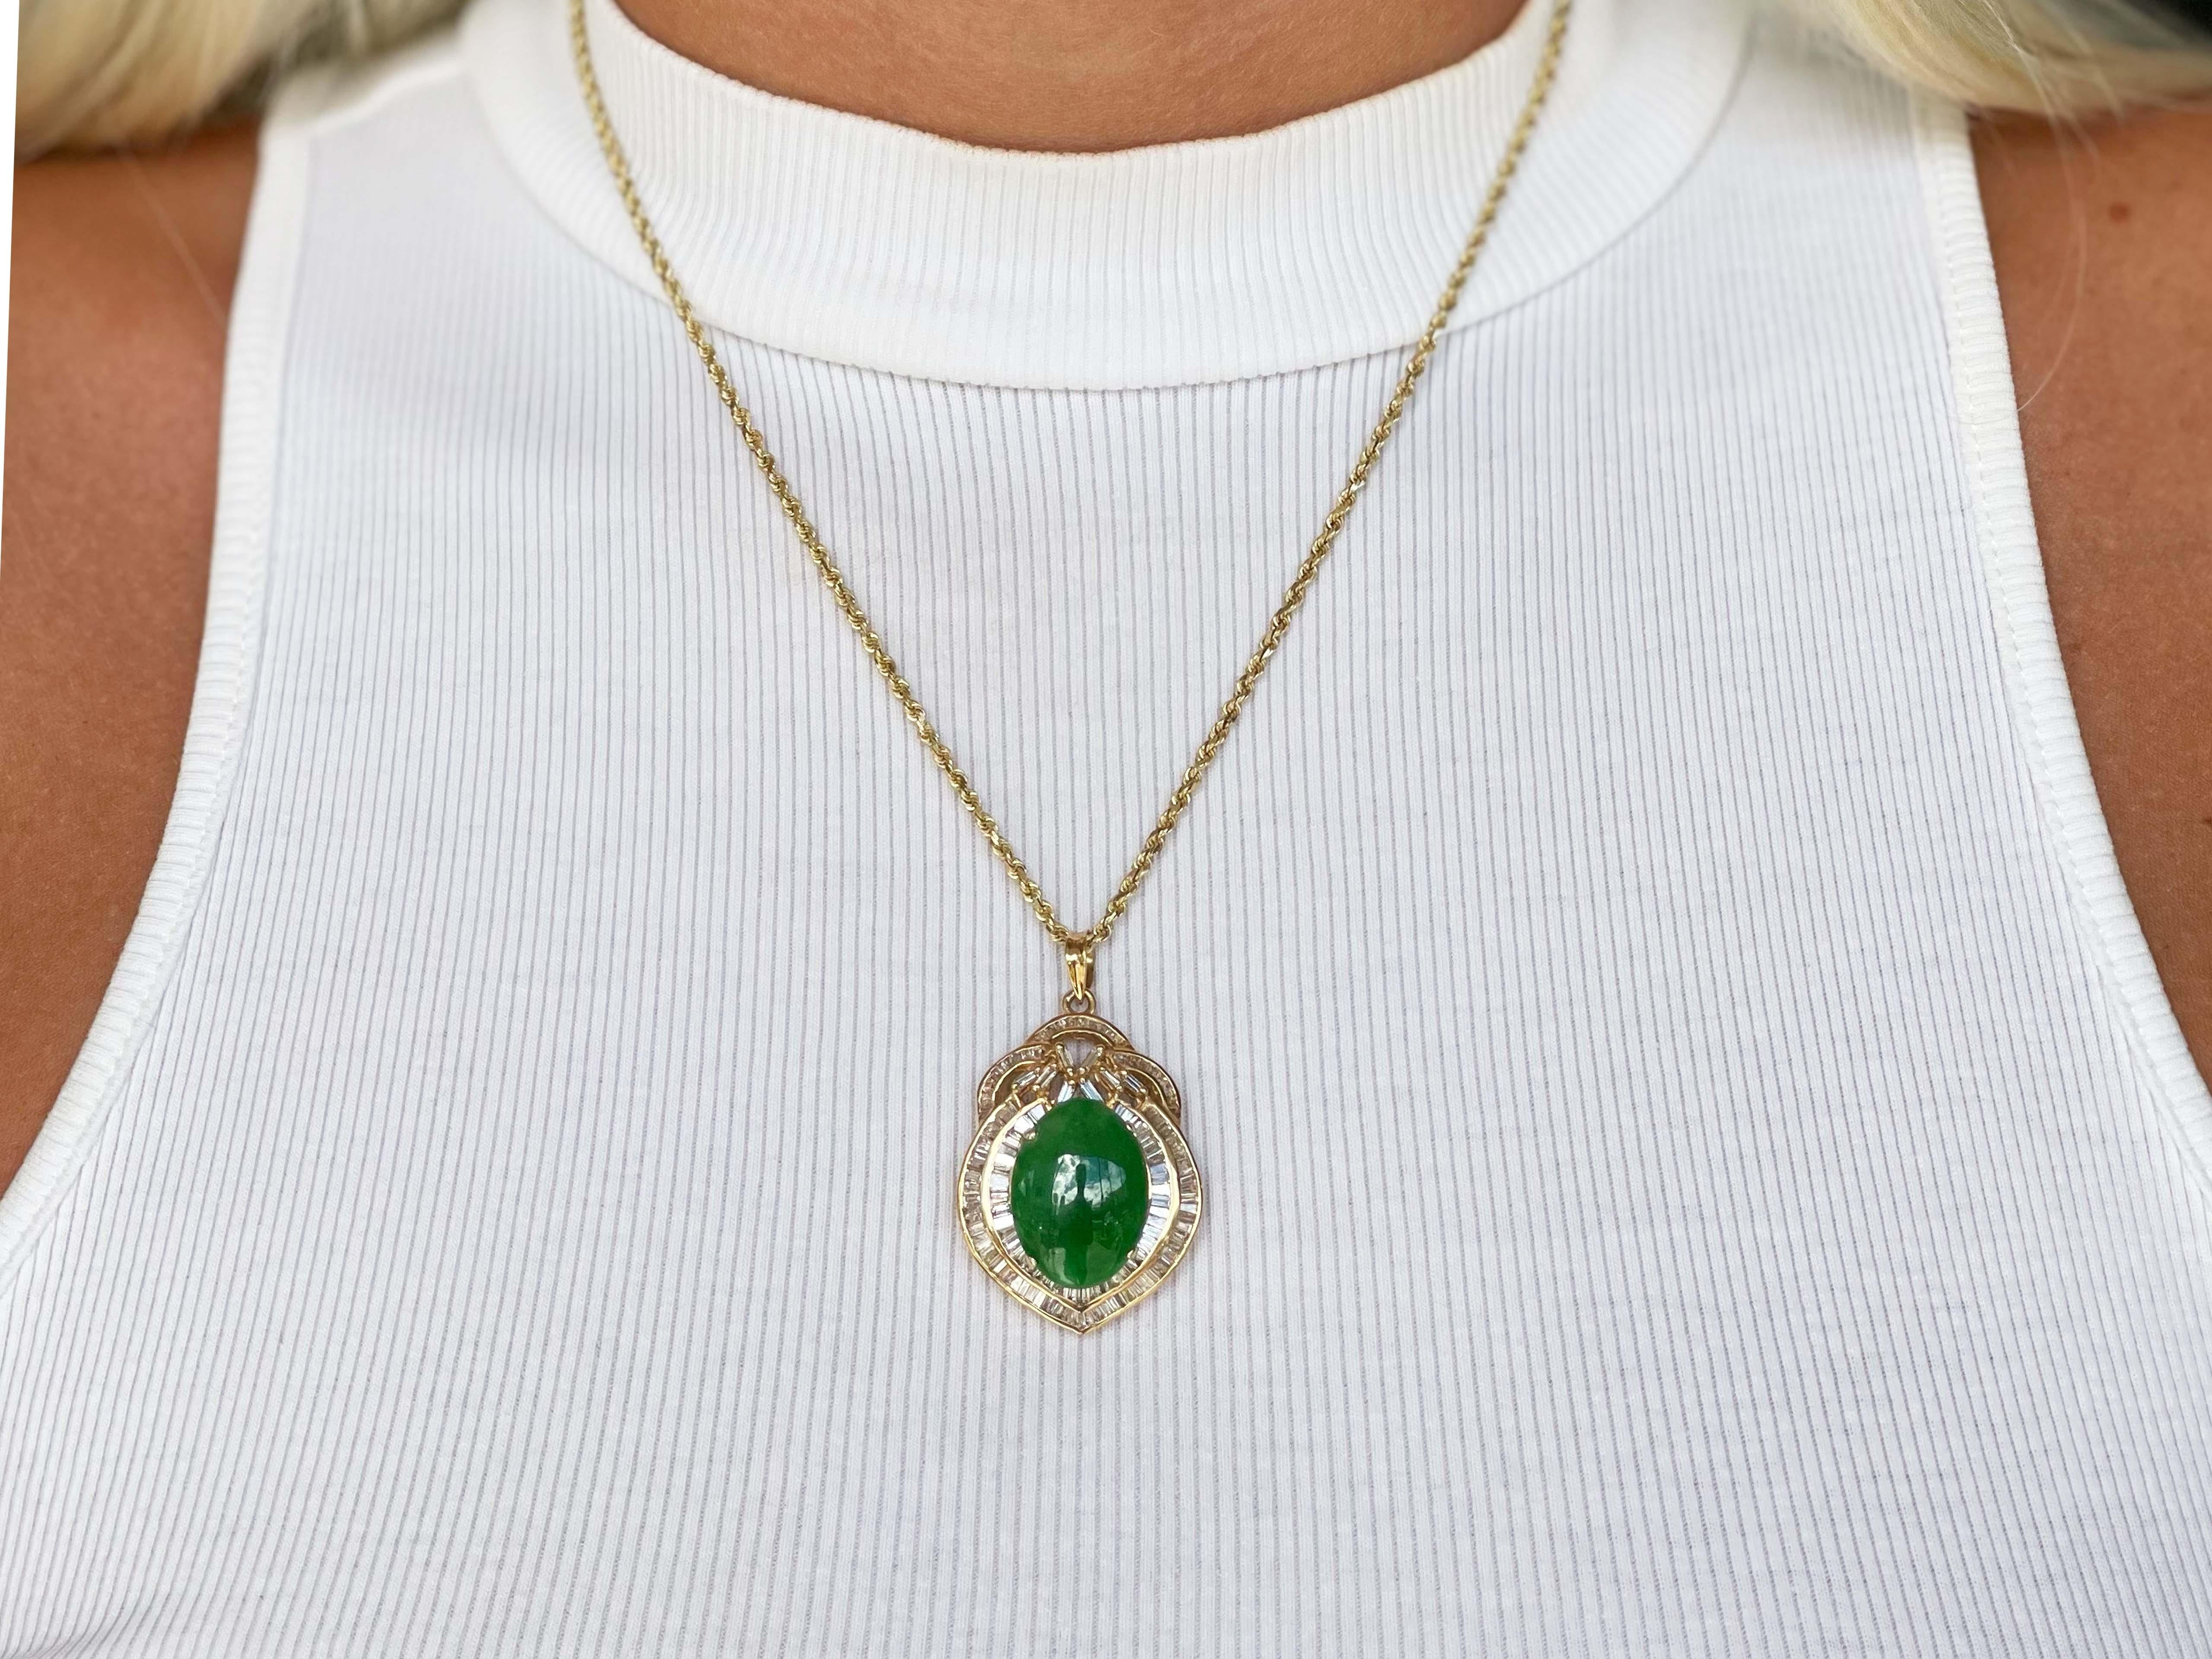 GIA Vintage Cabochon Mottled Green Translucent Jadeite Jade and Diamond Pendant in 18k Yellow Gold. This stunning pendant is set with a gorgeous oval shape cabochon mottled green jadeite jade with a double baguette diamond halo. The center Jadeite